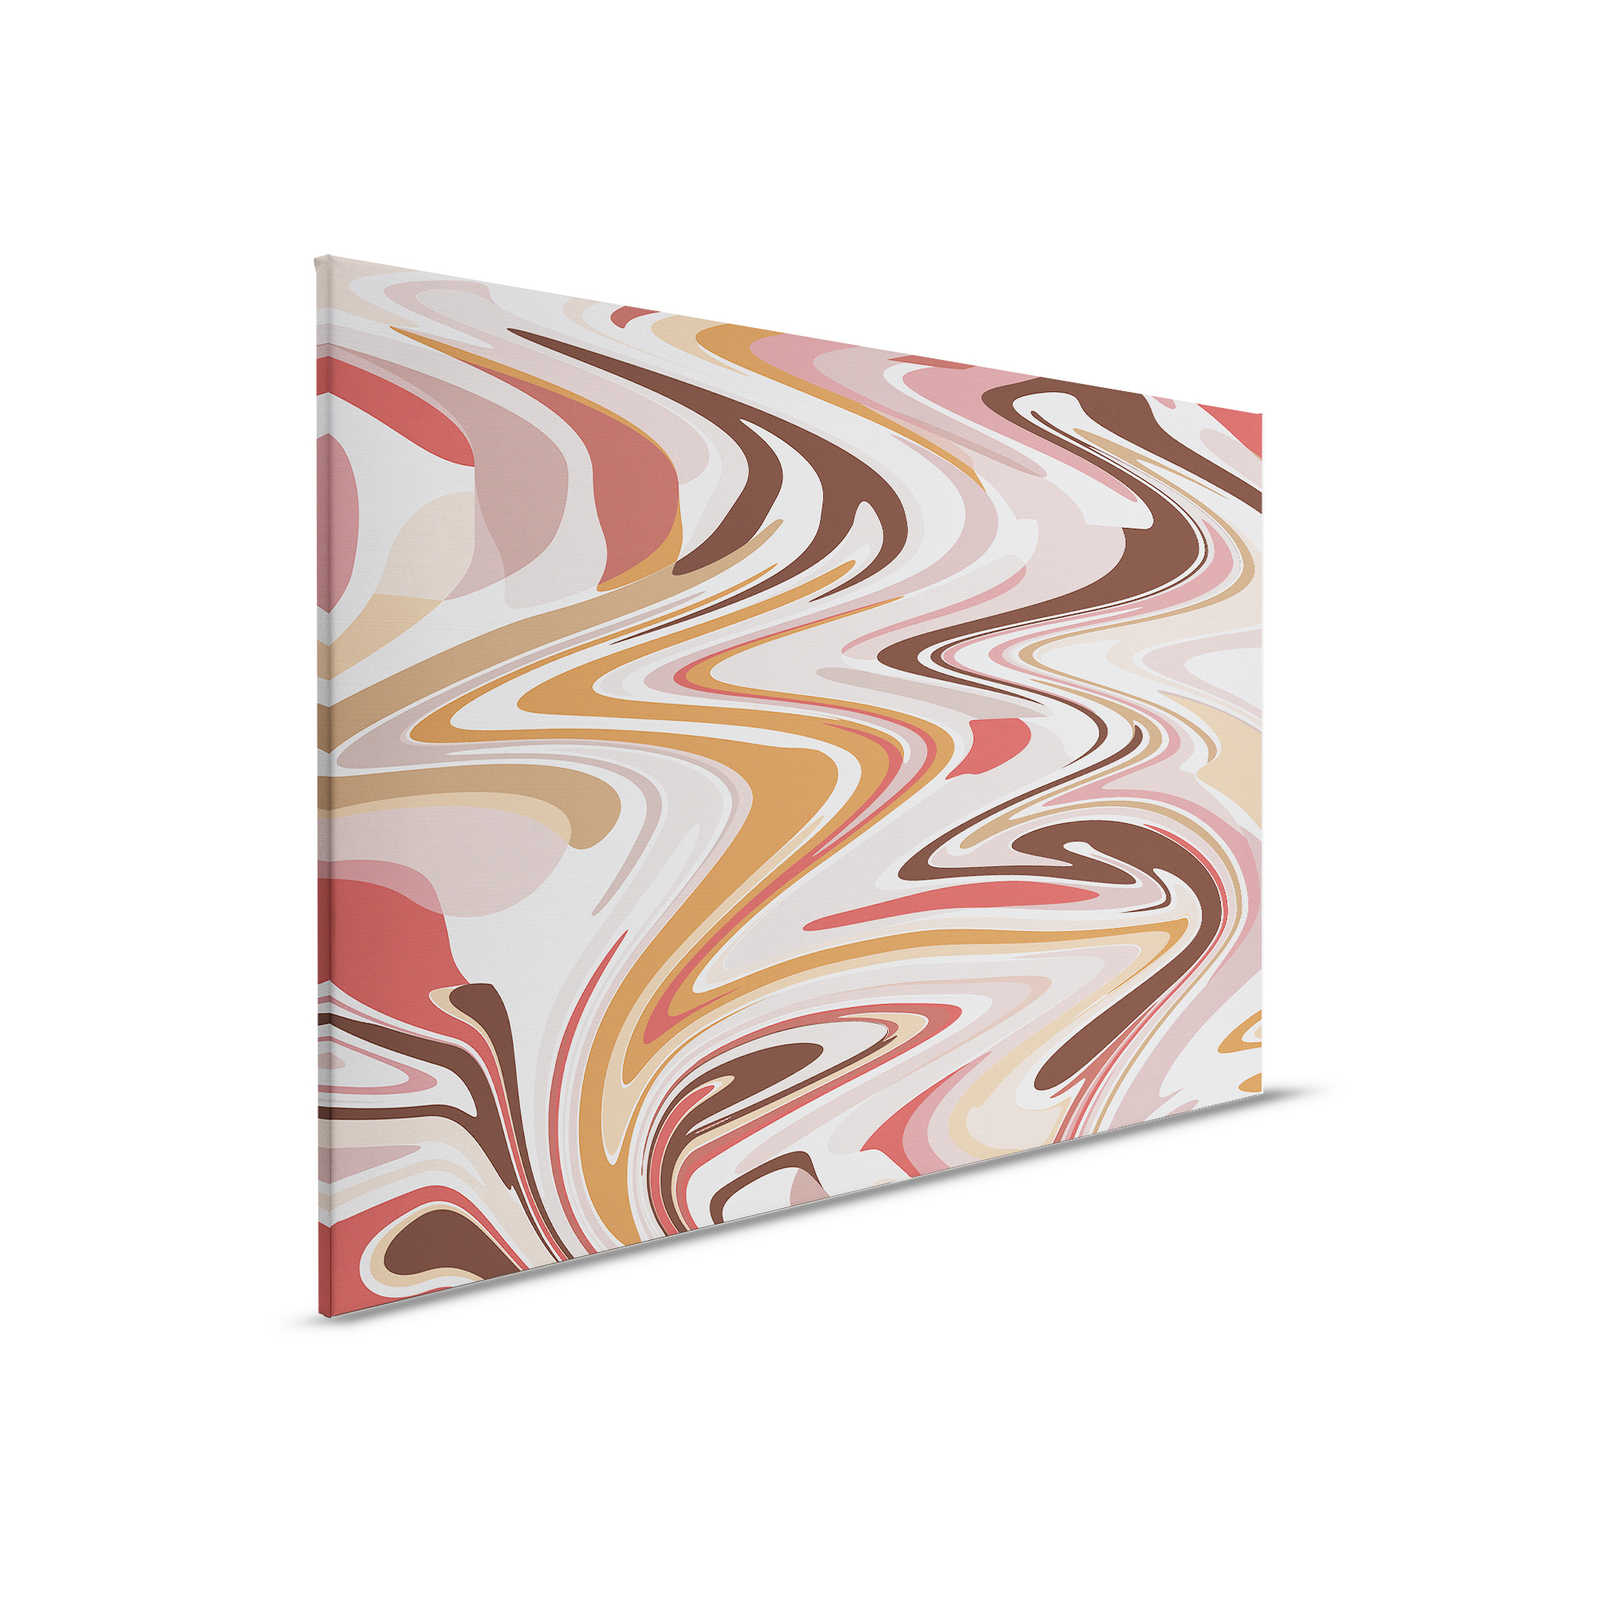         Canvas painting with abstract colour pattern in warm tones - 0.90 m x 0.60 m
    